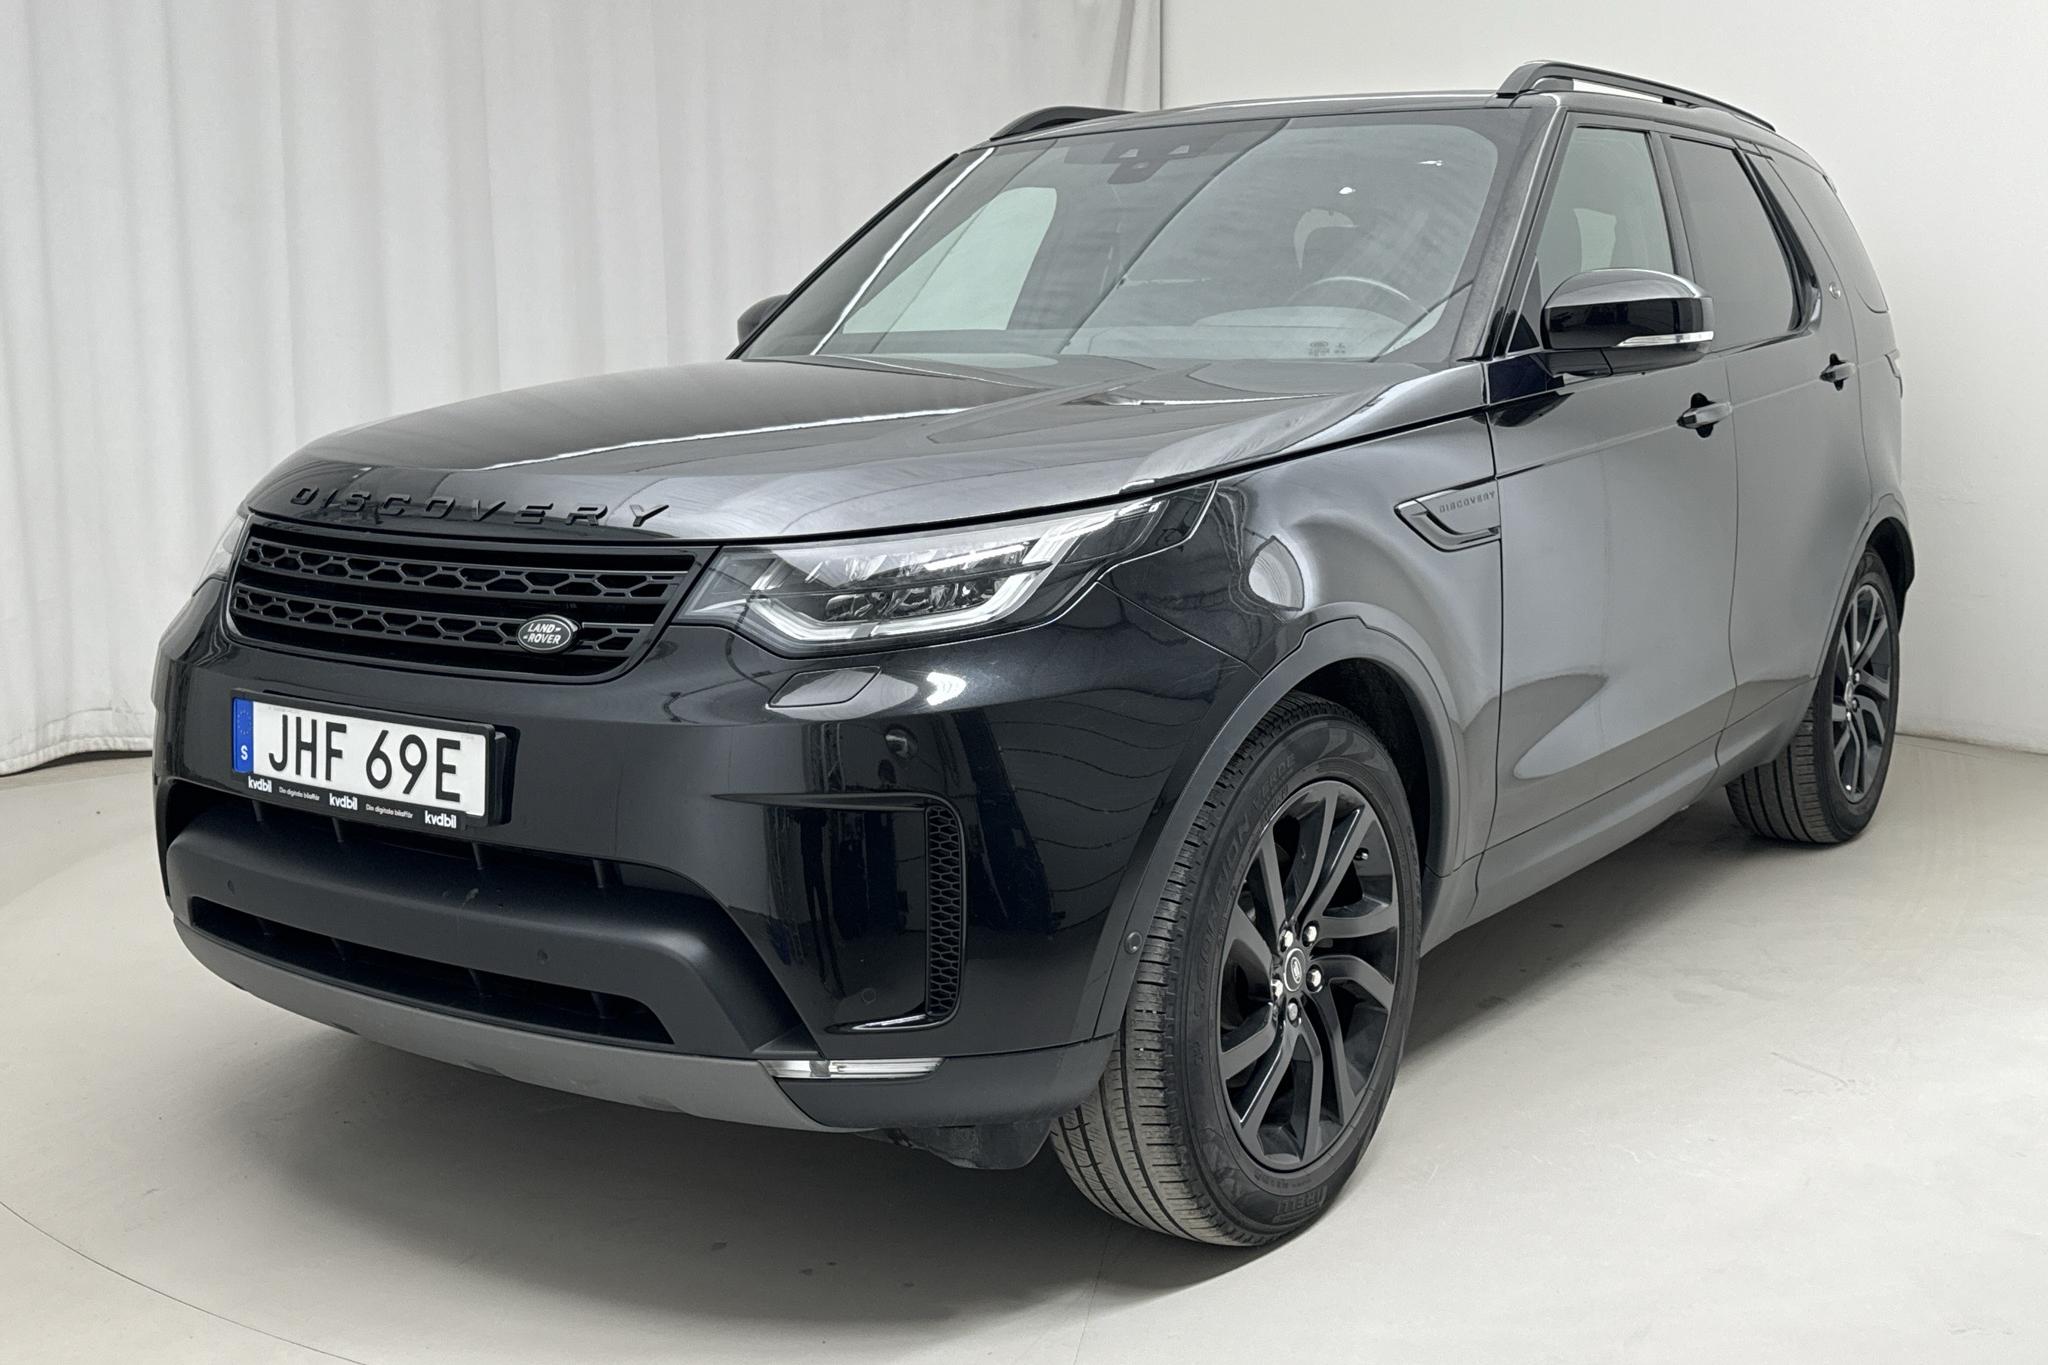 Land Rover Discovery 3.0L TD6 Diesel (258hk) - 100 400 km - Automatic - black - 2017